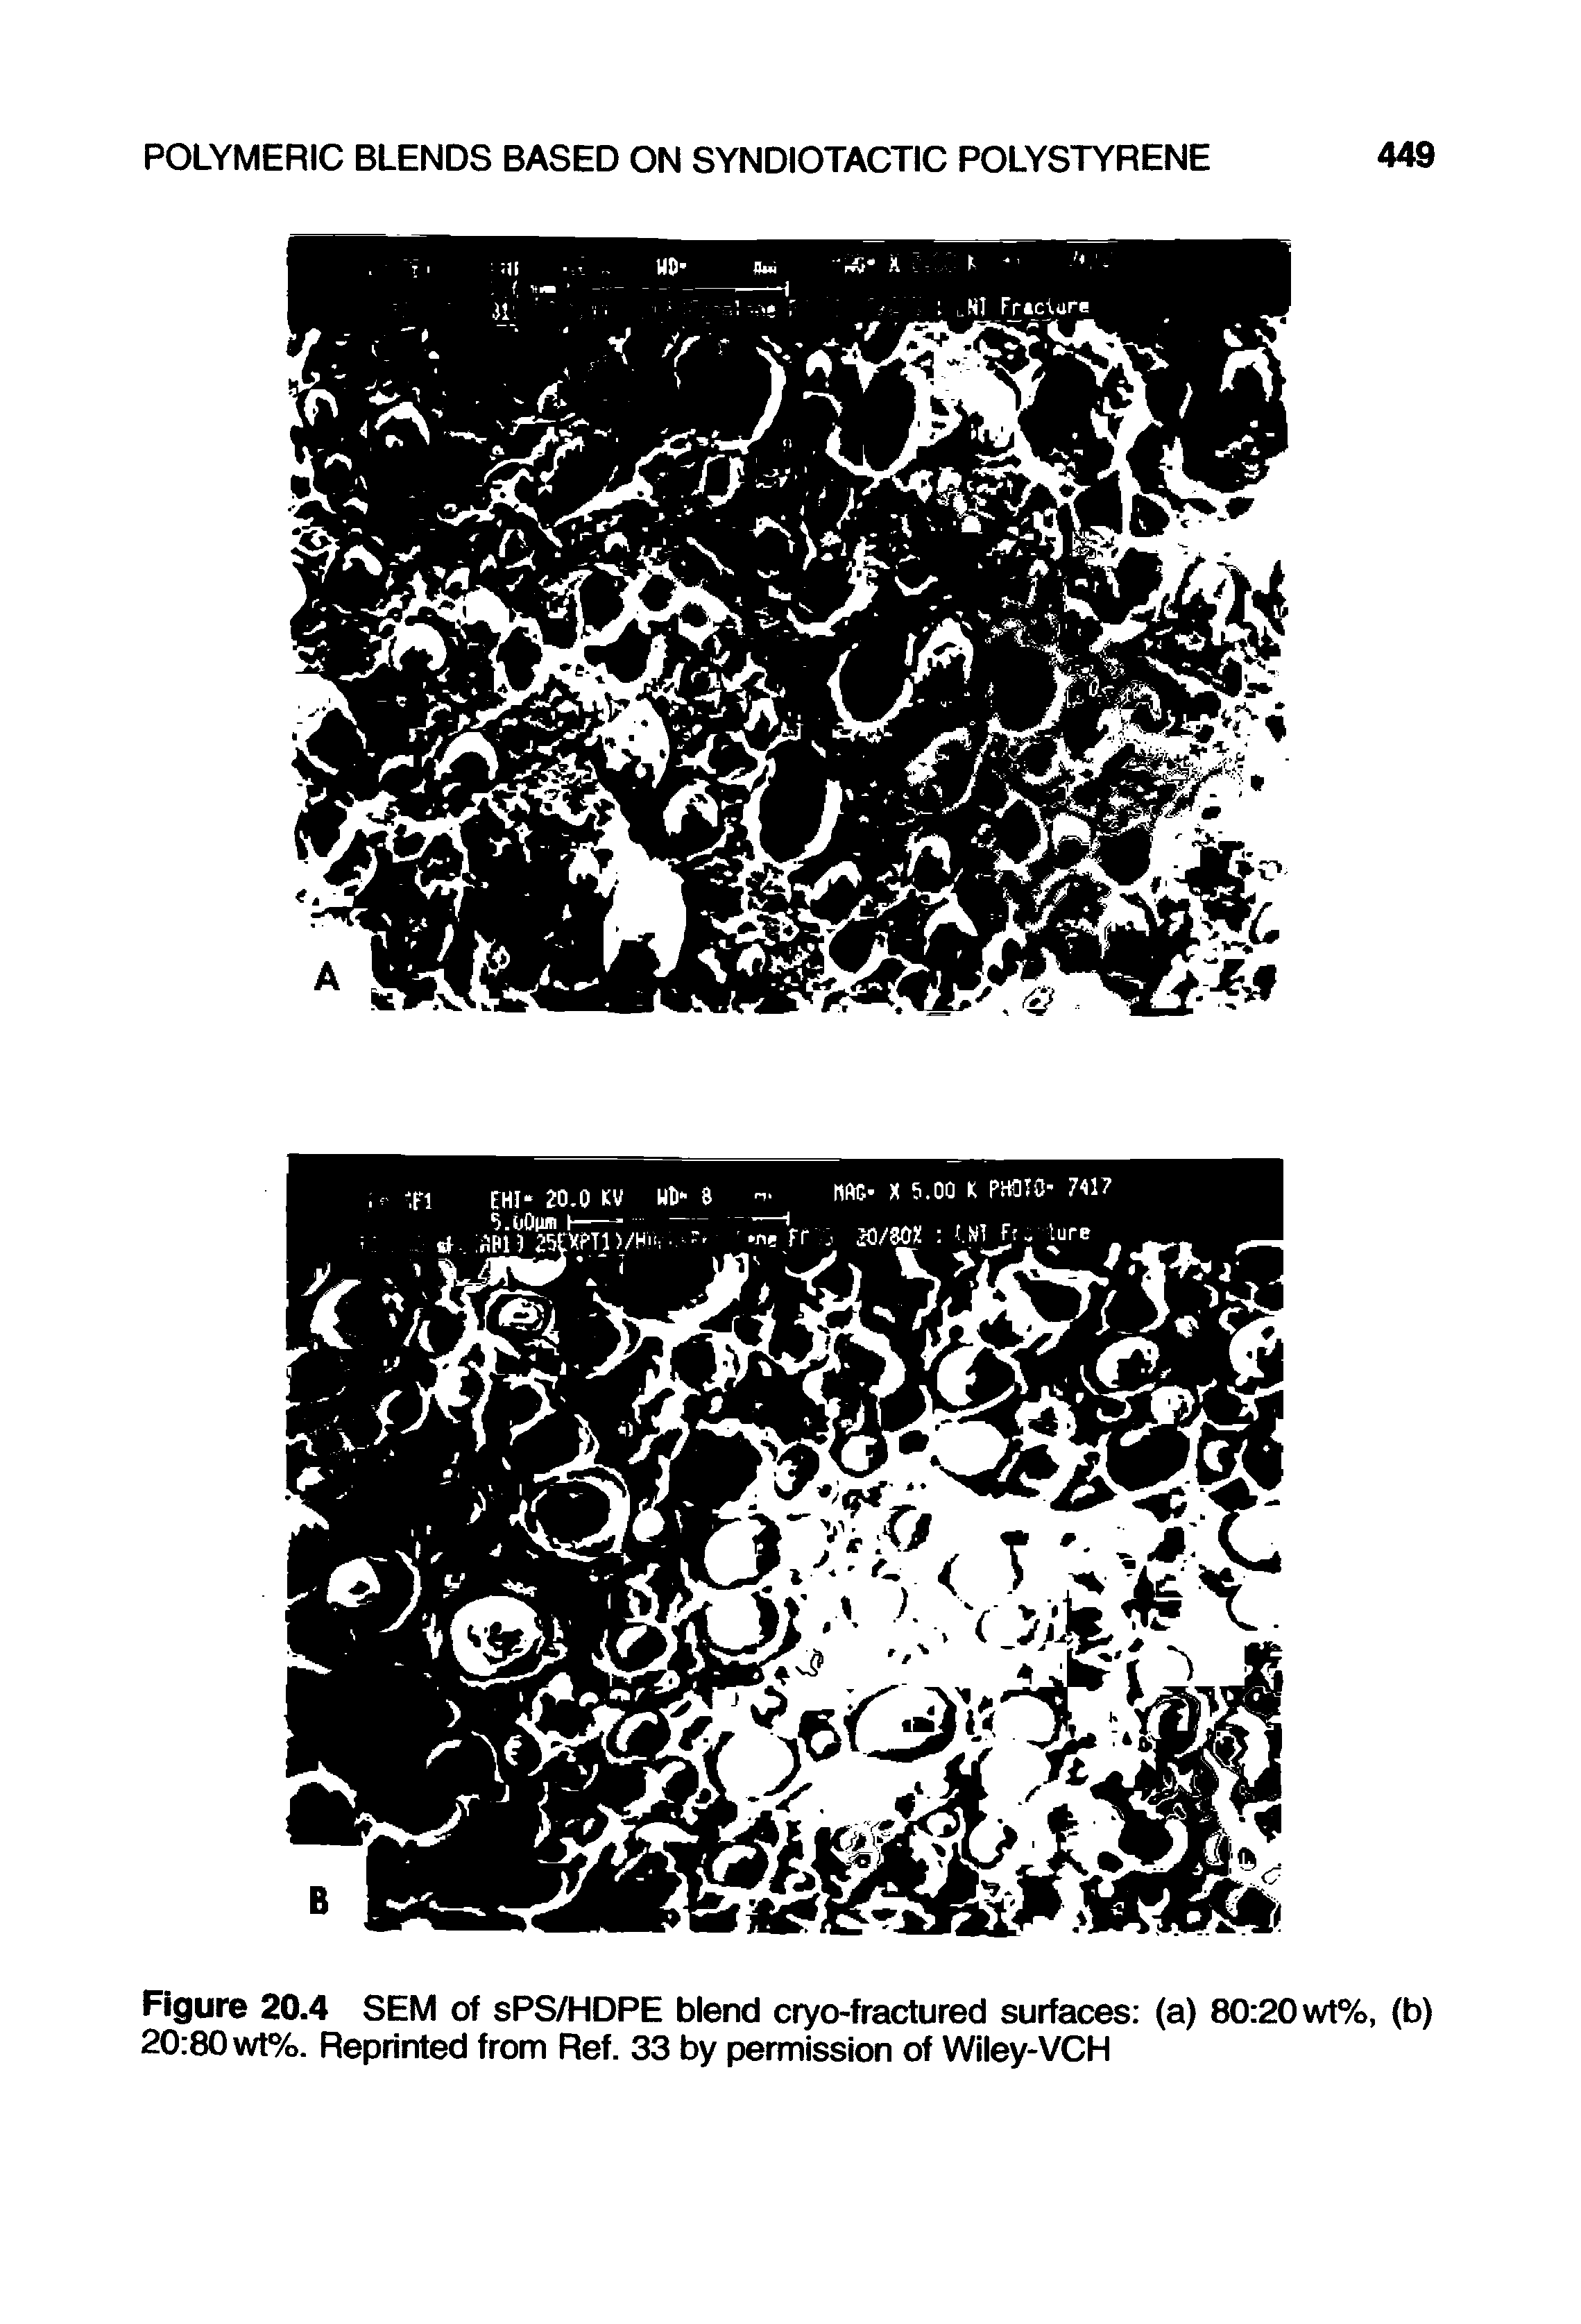 Figure 20.4 SEM of sPS/HDPE blend cryo-fractured surfaces (a) 80 20 wt%, (b) 20 80 wt%. Reprinted from Ref. 33 by permission of Wiley-VCH...